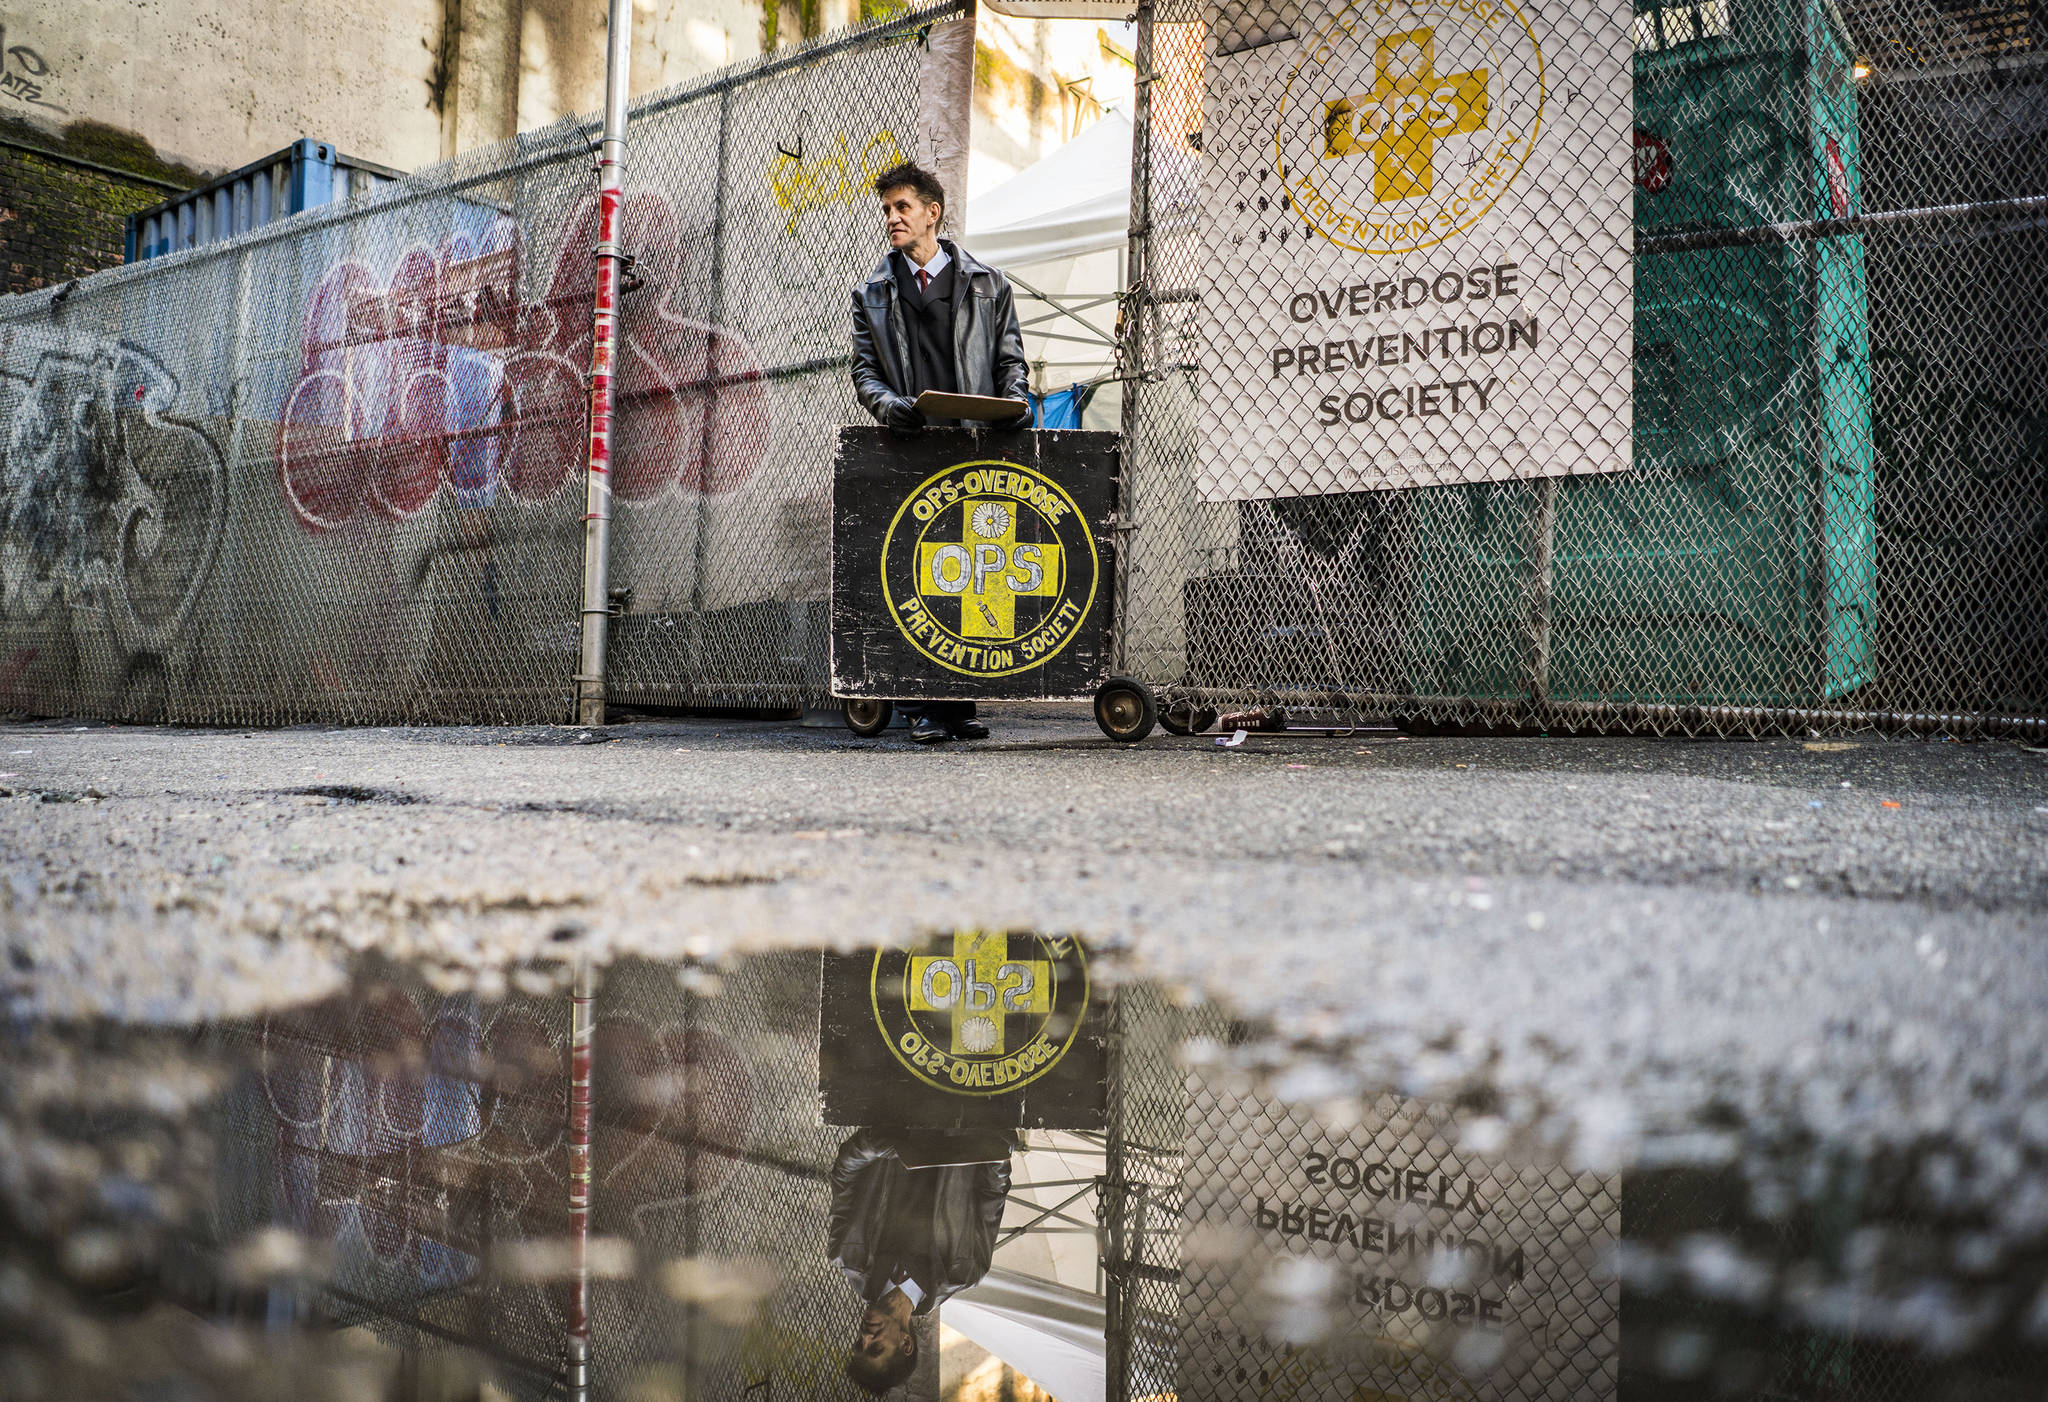 The Overdose Prevention Society runs one of Vancouver’s safe-injection sites, an operation that started as a pop-up and now includes a permanent facility. Frederick Williams checks off users as they enter. Washington Post photo by John Lehmann